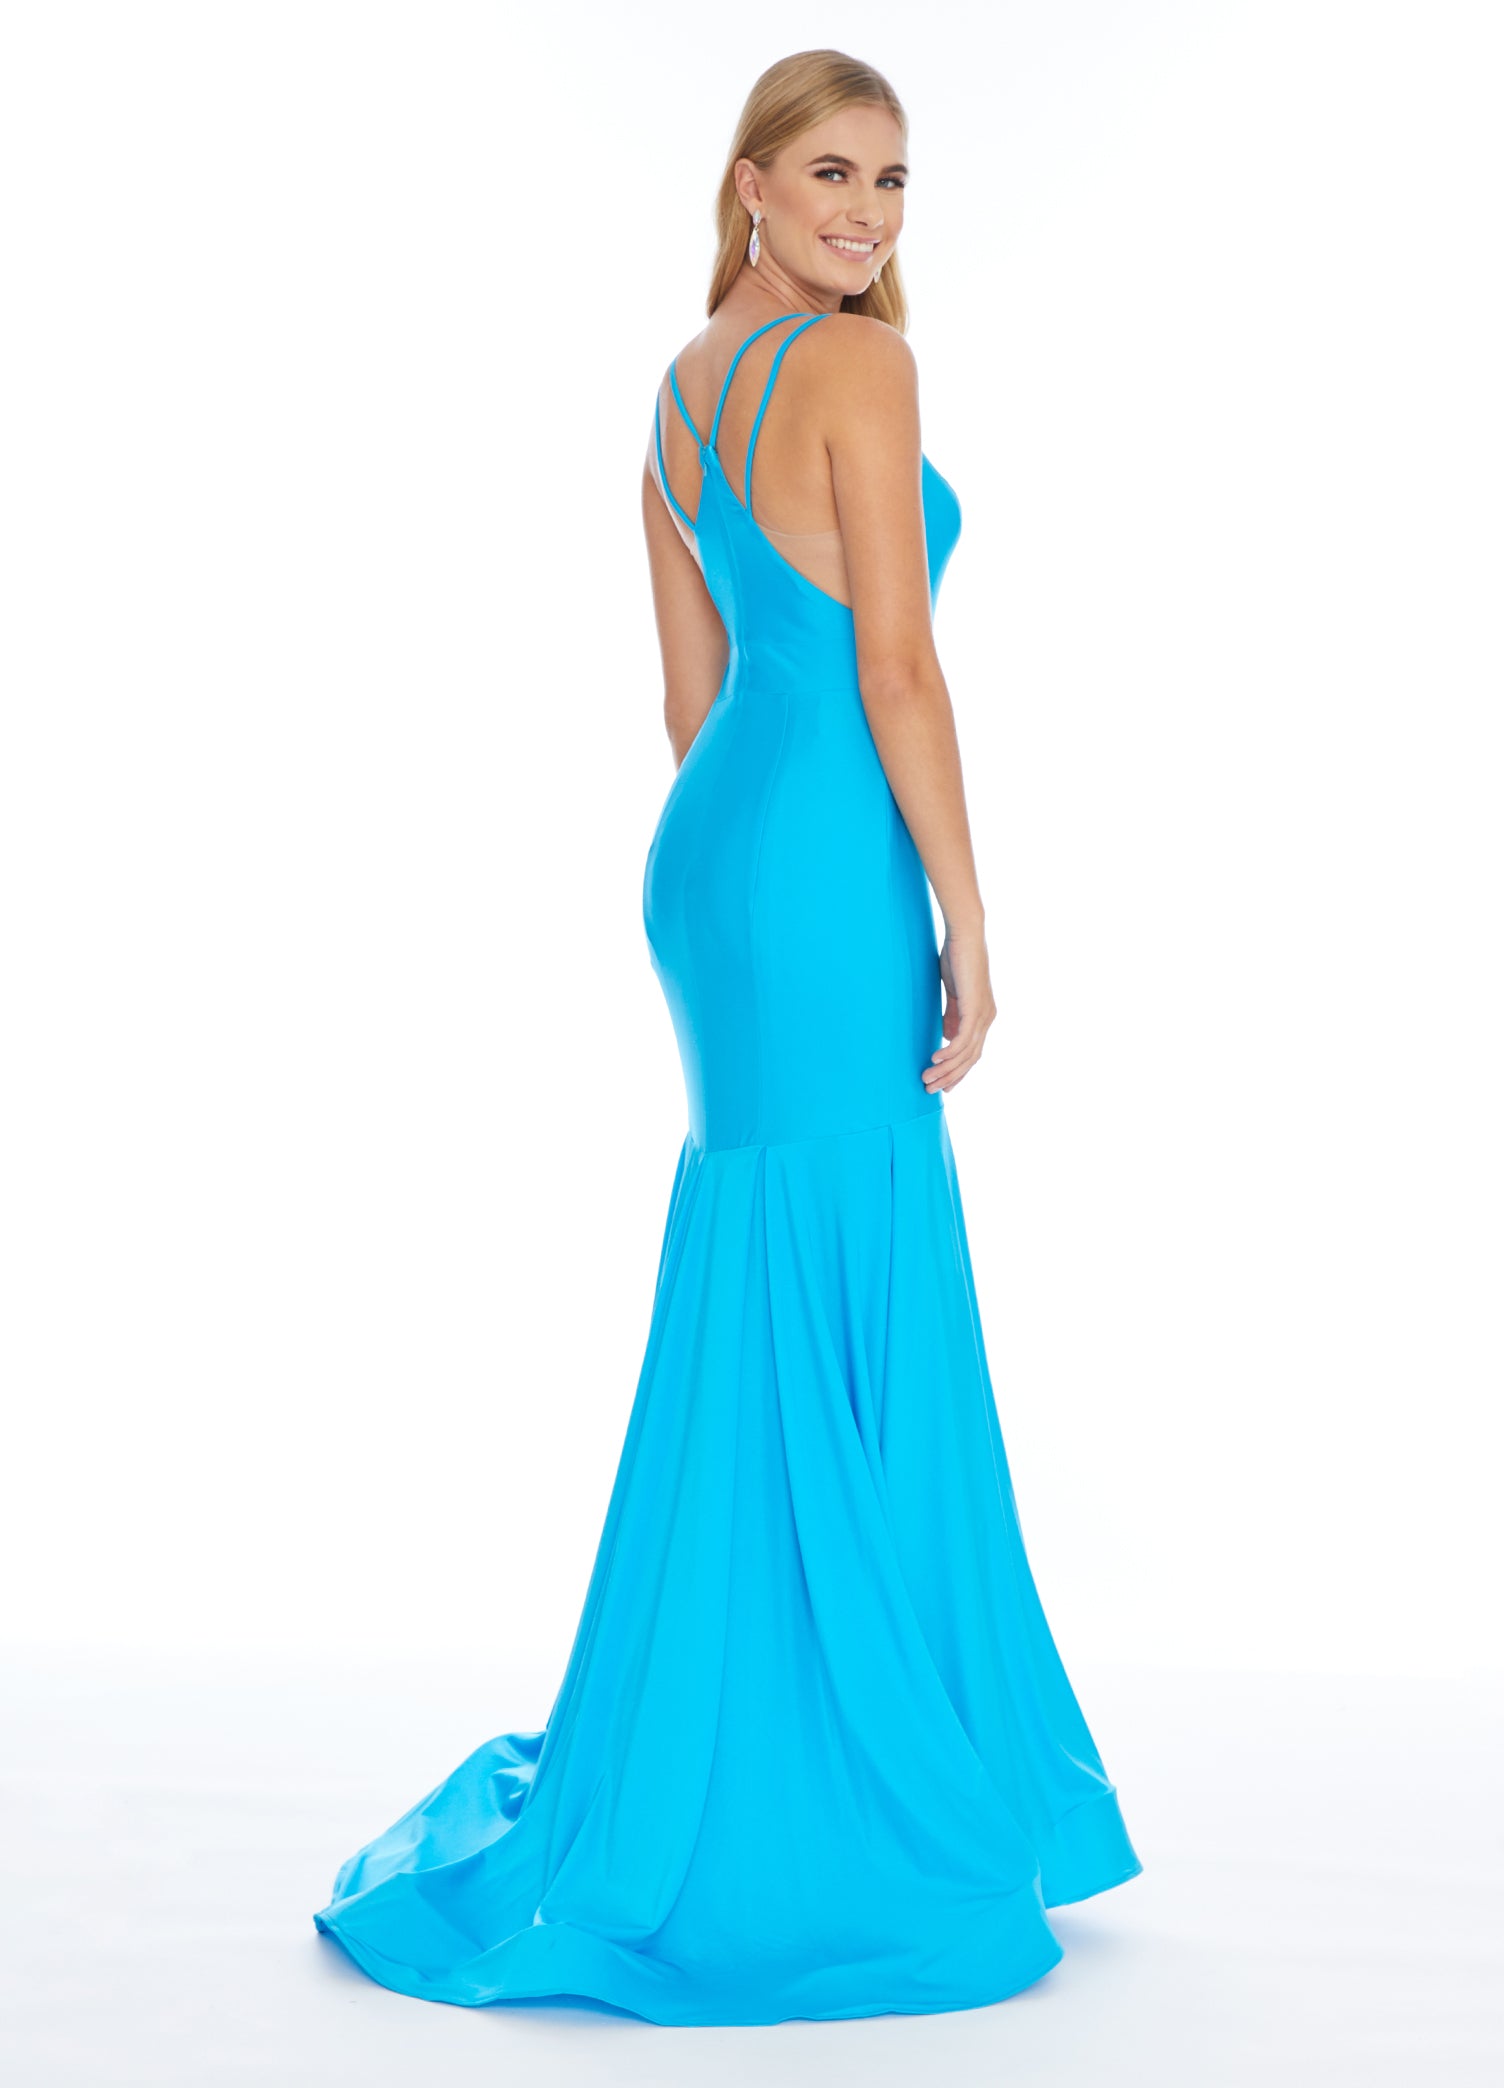 Ashley Lauren 1870 This stunning fit & flare evening gown is sure to turn heads! The bustier is has a v-neckline complete with double spaghetti straps and illusion panel sides. The skirt embellished with box-pleats and sweeping train. Racer Back Jersey  Available Sizes: 6  Available Colors: Turquoise